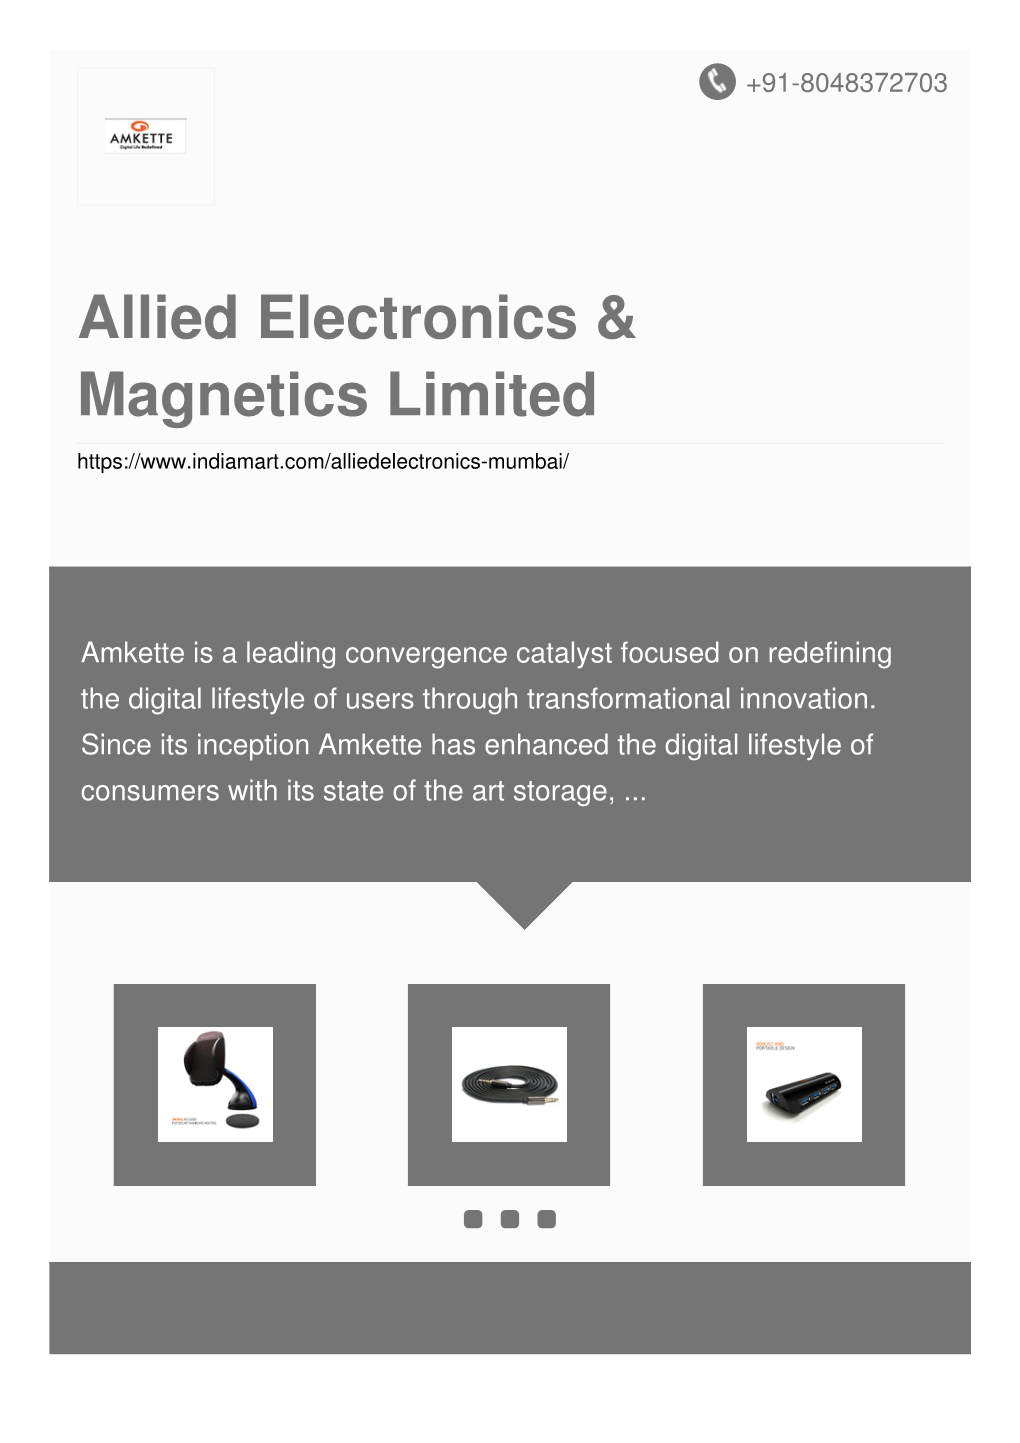 Allied Electronics & Magnetics Limited